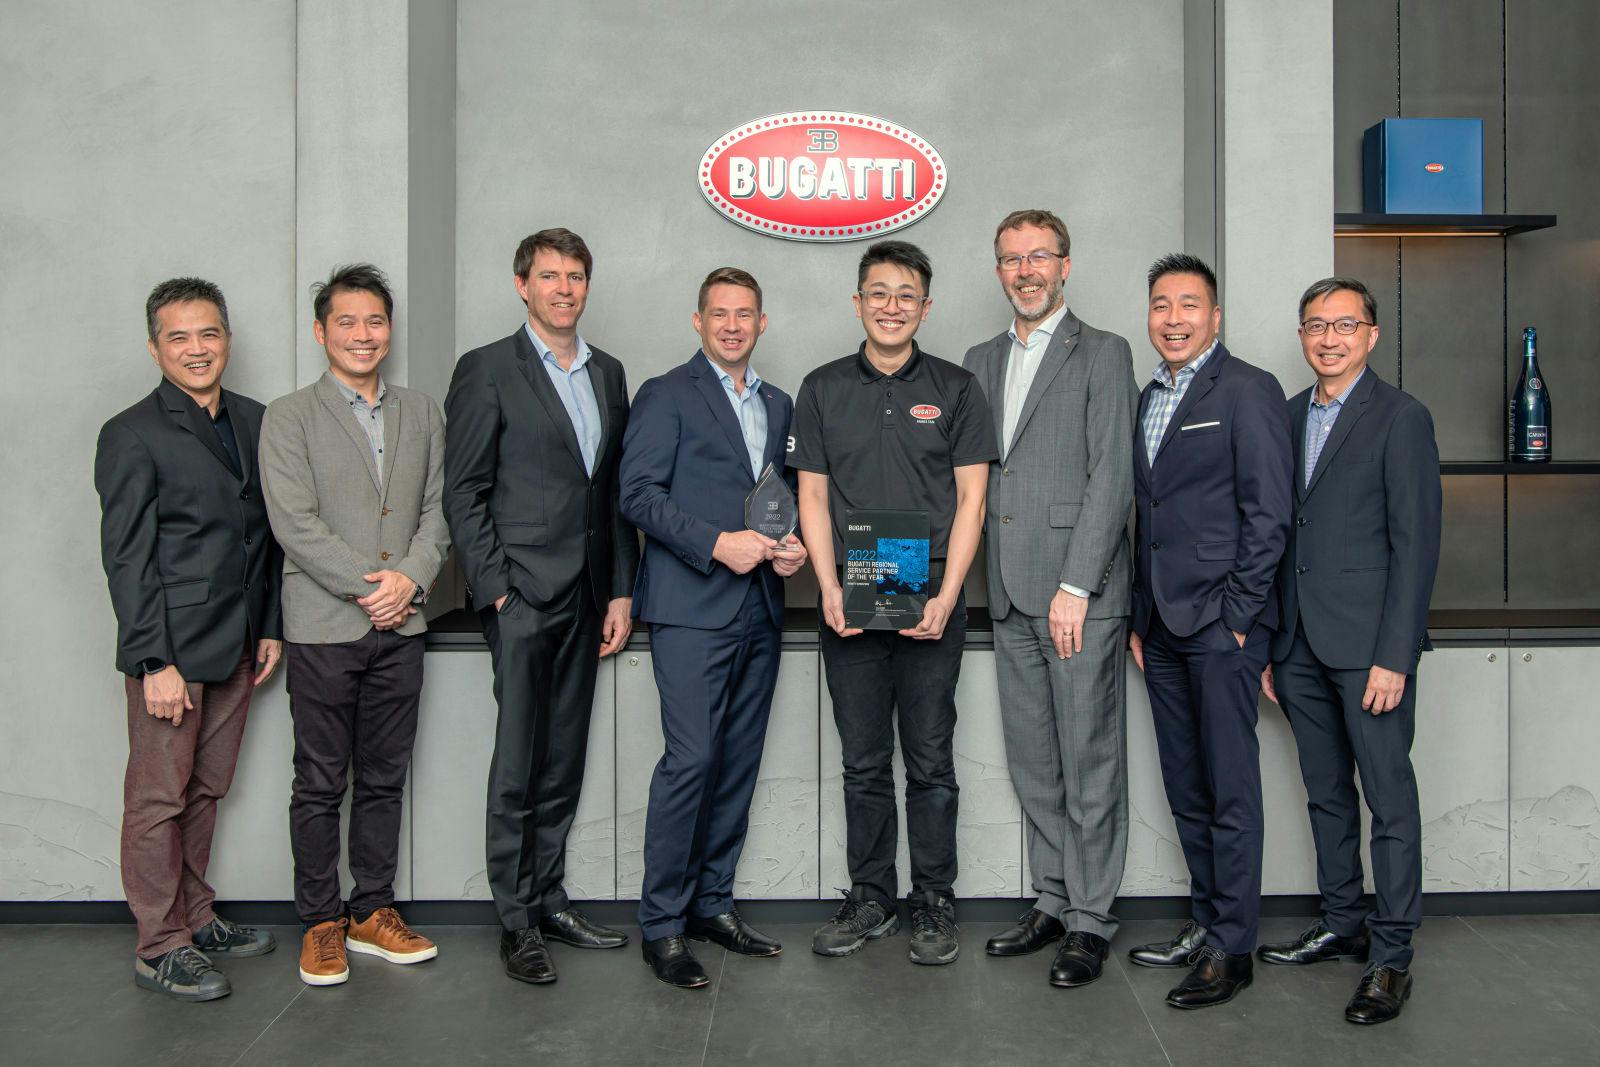 The Bugatti Singapore team is named Regional Best Performing Bugatti Service Partner for the Asia/Middle East region.